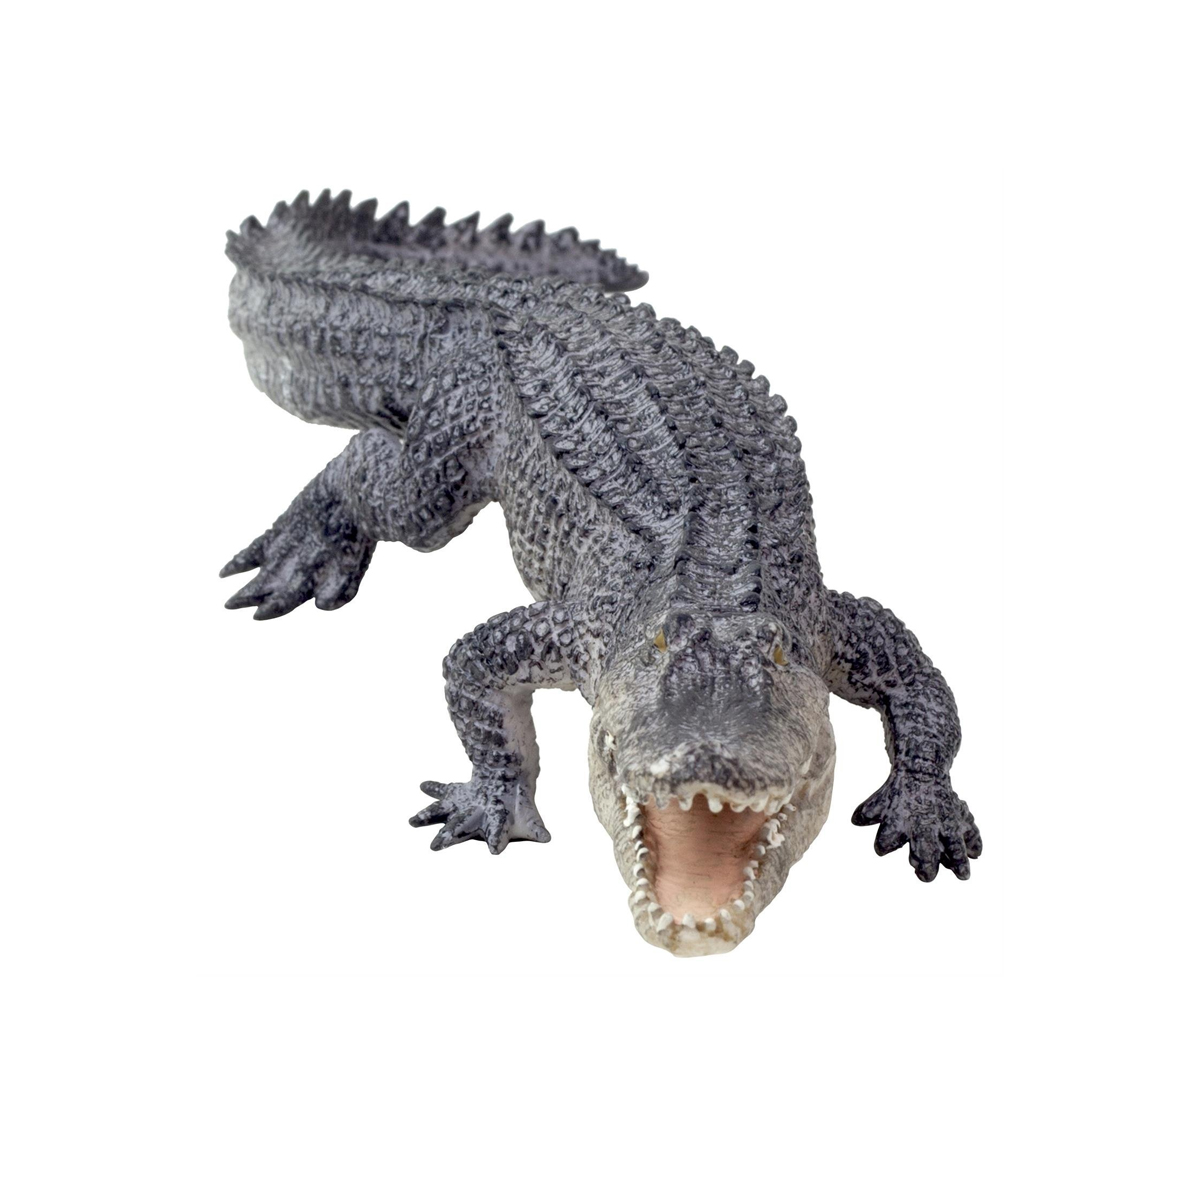 Mojo-Alligator With Moving Jaw  – Online shop of Super chain  stores